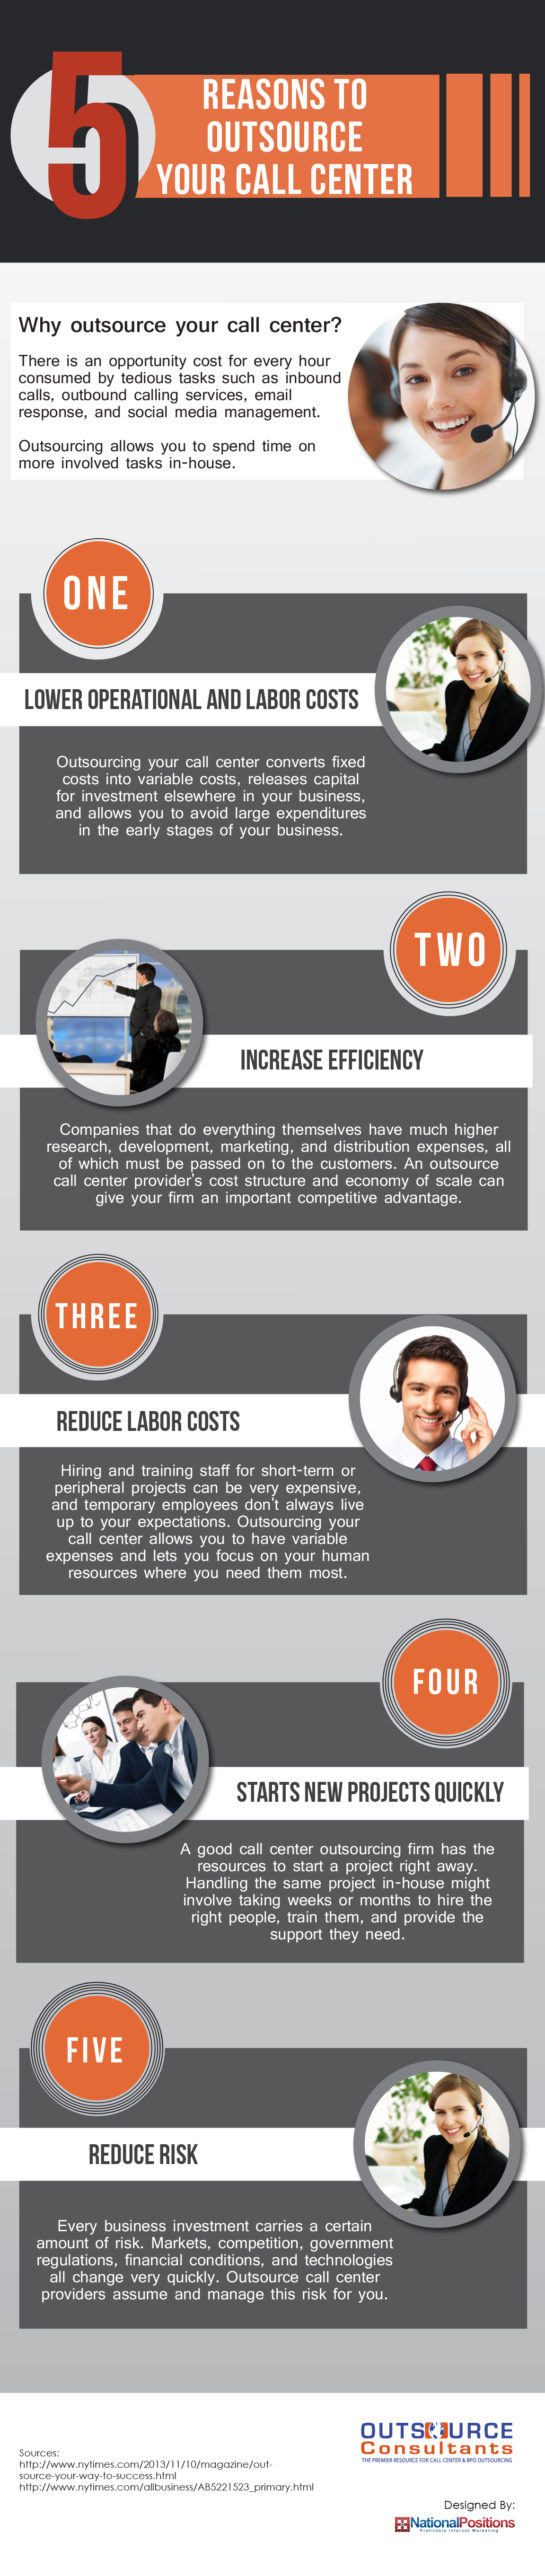 Why Outsource Your Call Center?